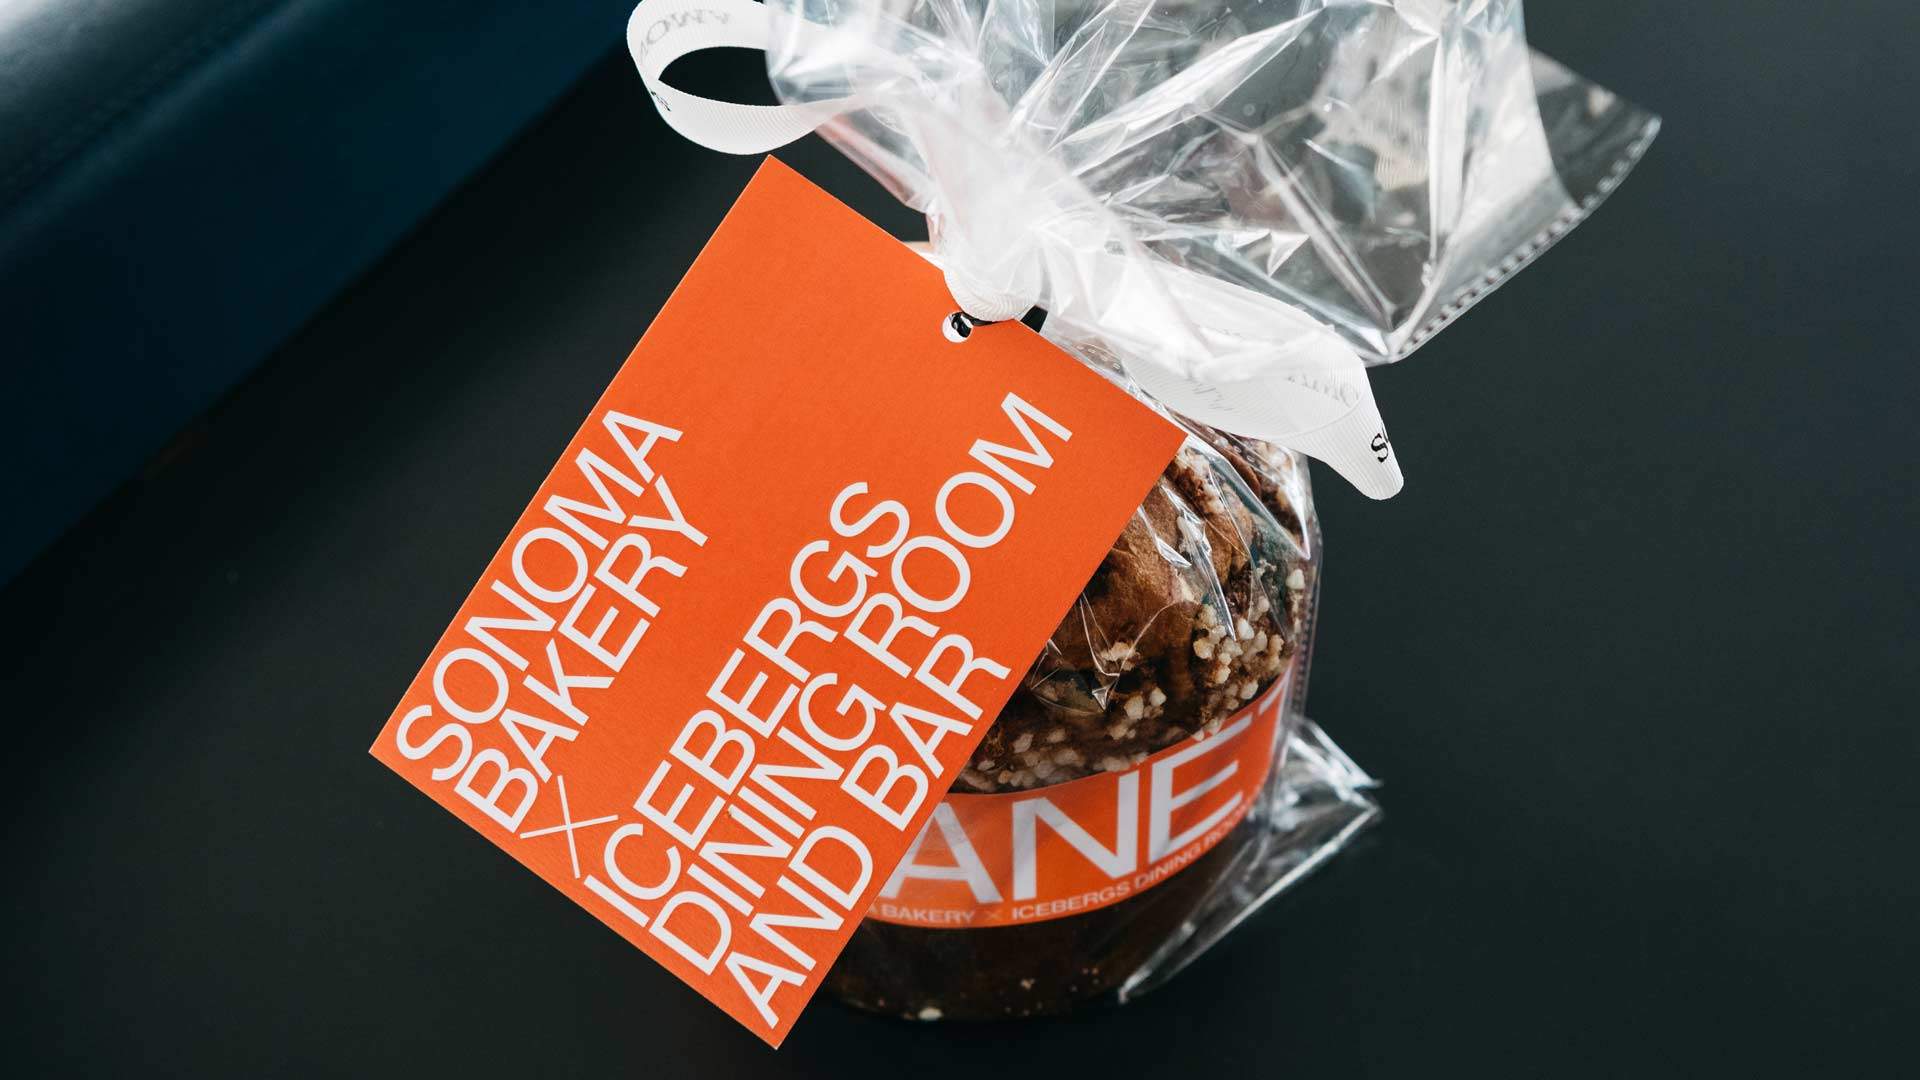 Icebergs and Sonoma Have Released a Limited-Edition Panettone Filled with Aussie Ingredients